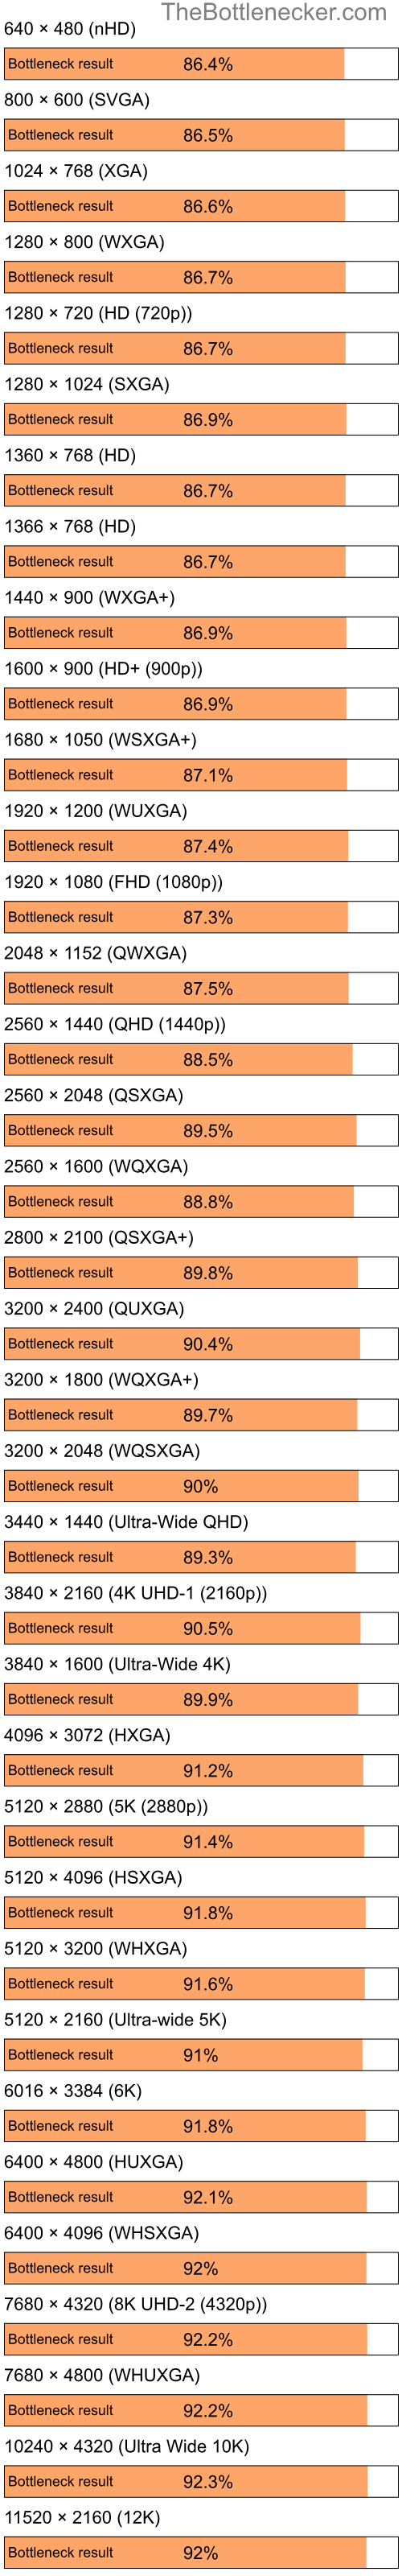 Bottleneck results by resolution for Intel Pentium 4 and NVIDIA GeForce4 Ti 4200 in Processor Intense Tasks